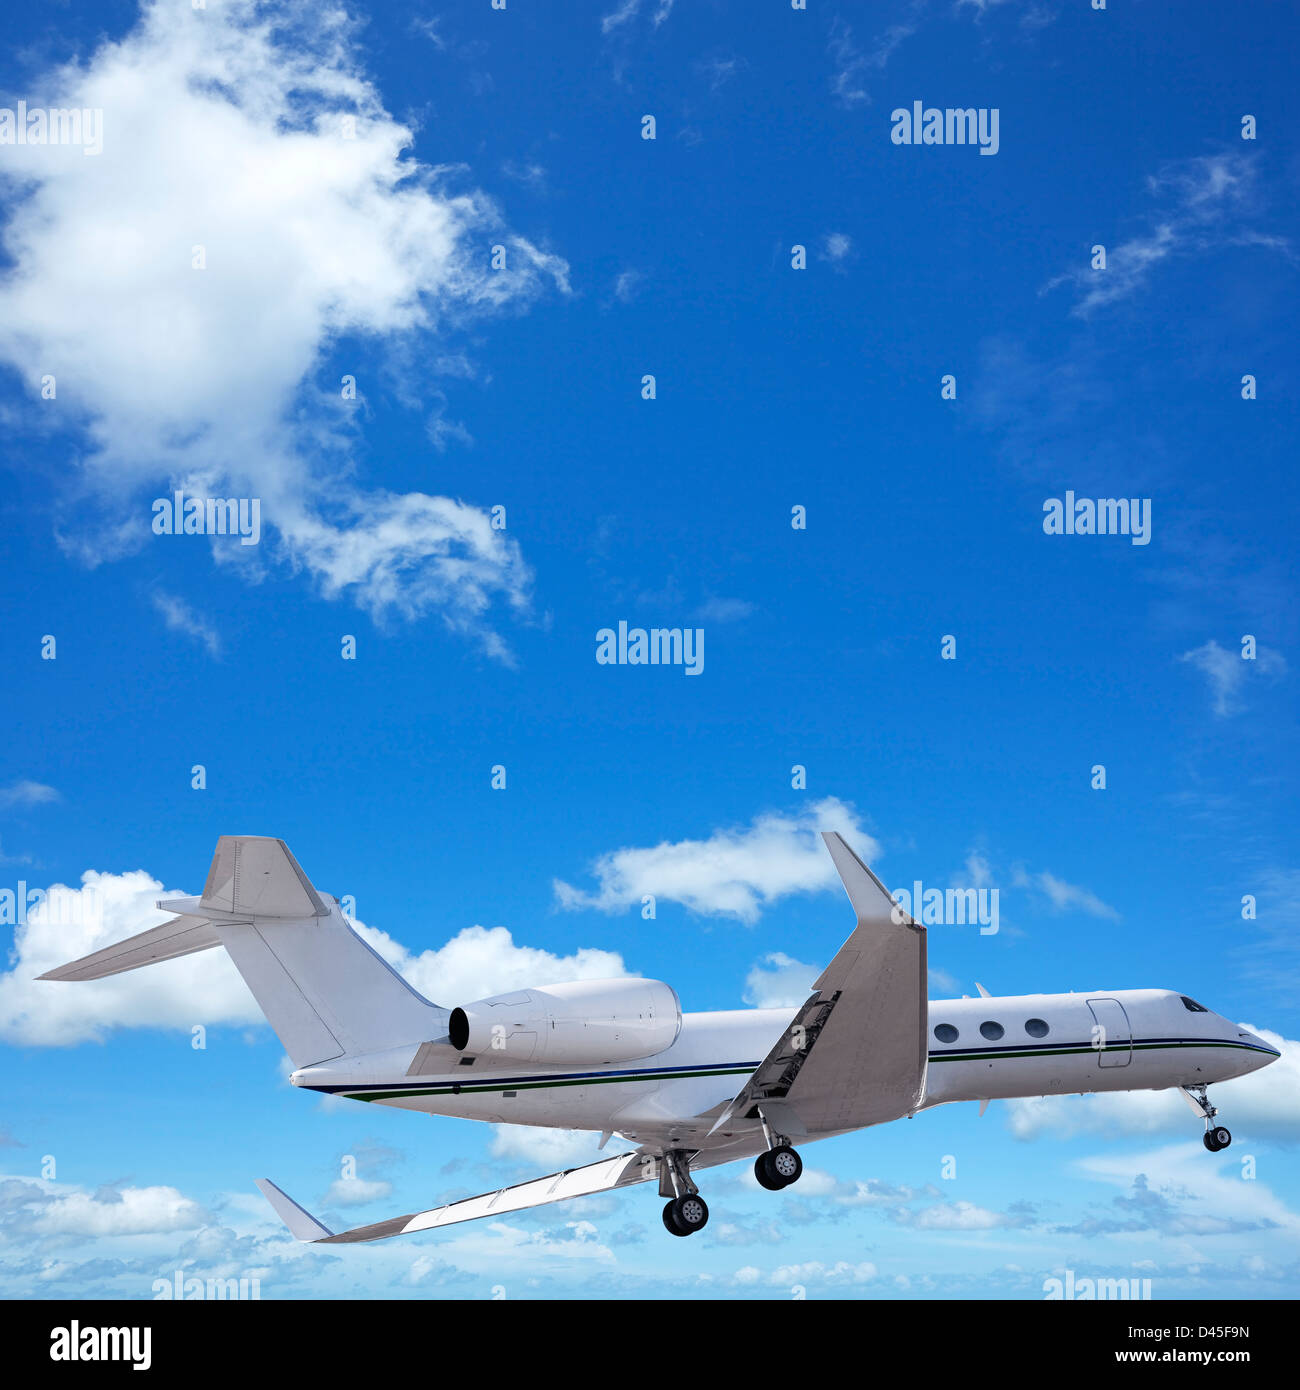 Private jet in a sky. Square composition. Stock Photo